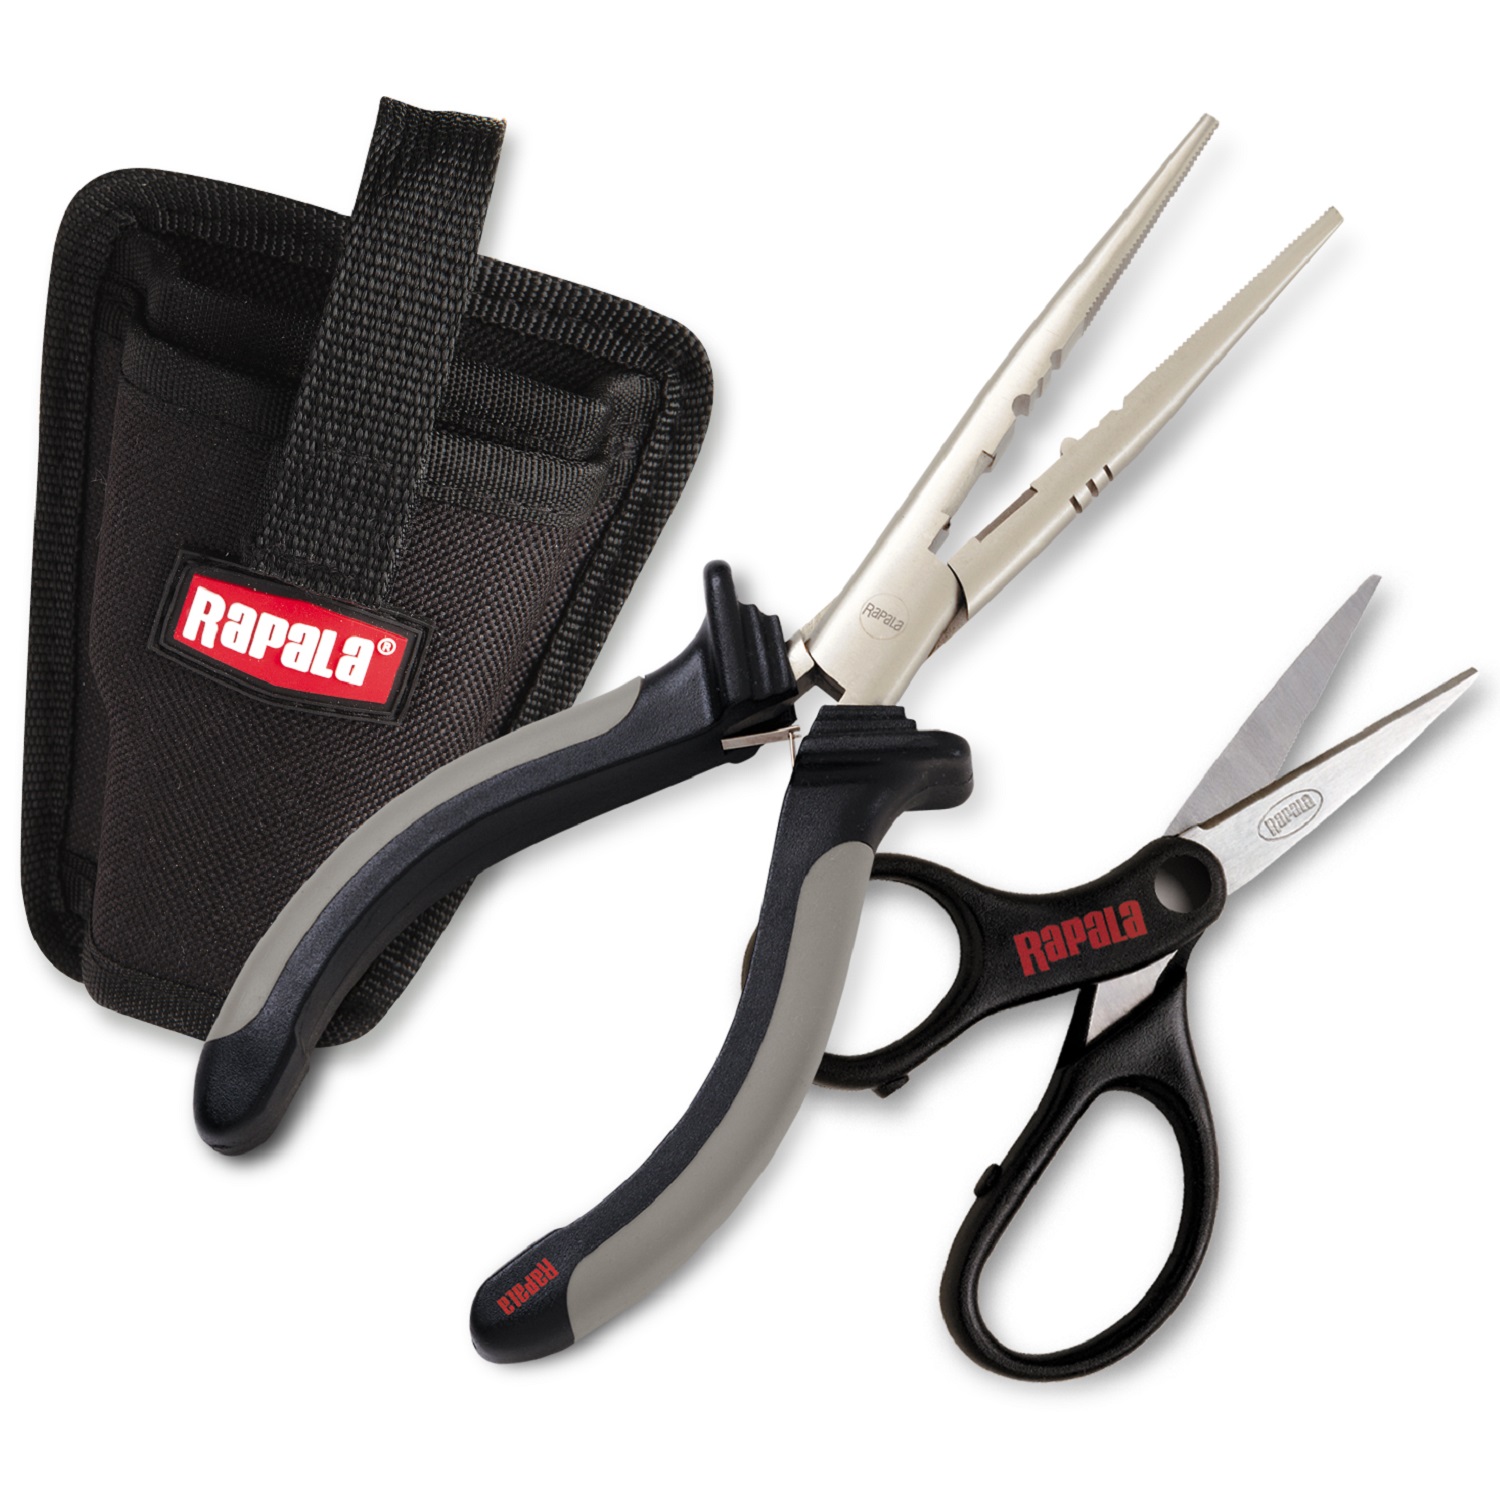 Rapala Pedestal Tool Combo with Pliers and Scissors